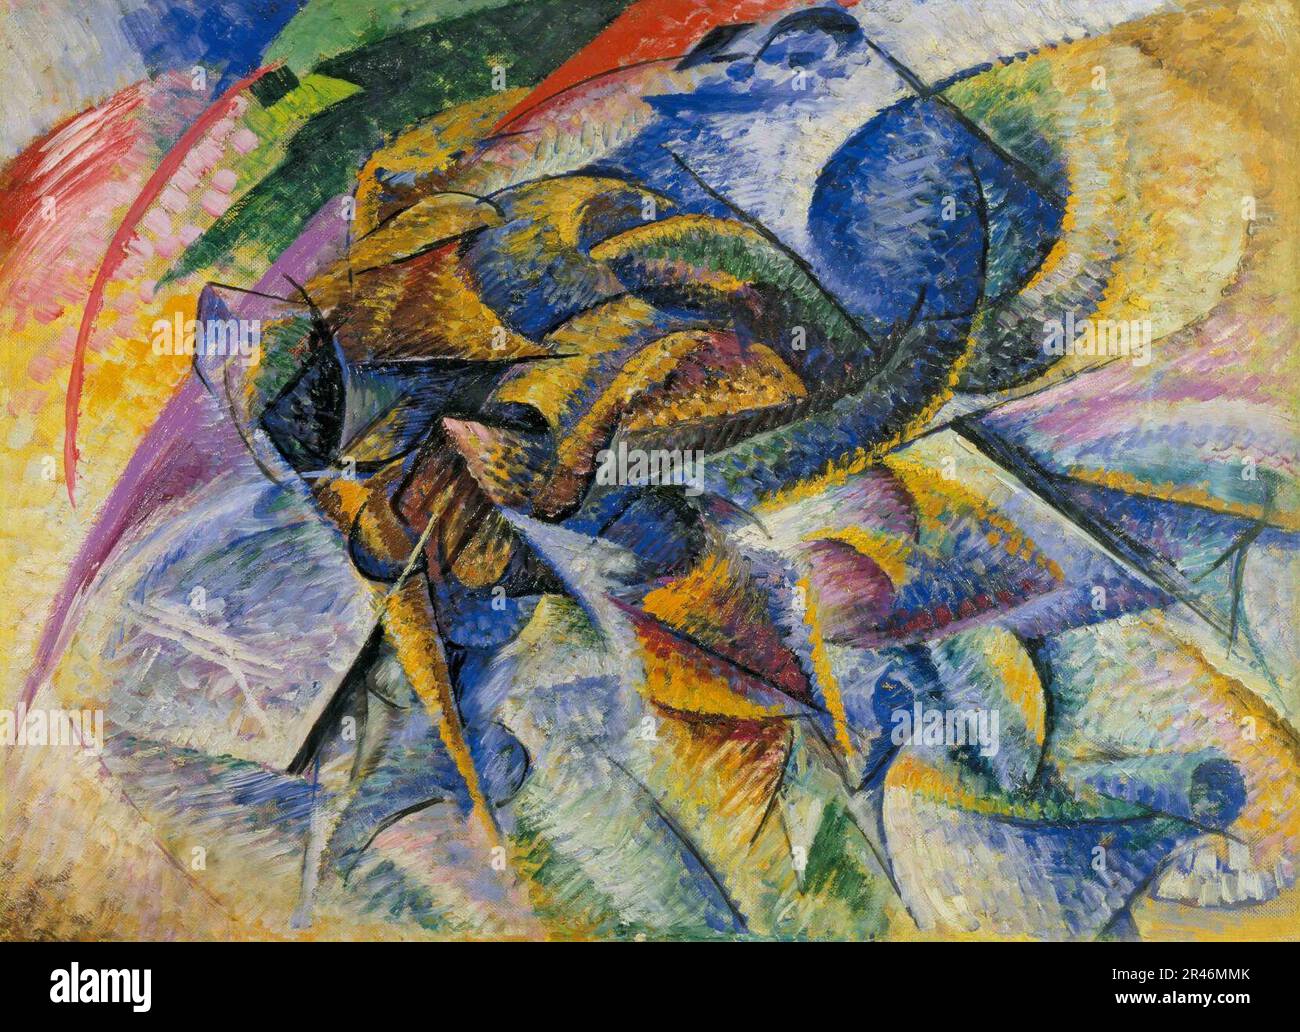 Umberto Boccioni, 1913, Dynamism of a Cyclist (Dinamismo di un ciclista), oil on canvas, 70 x 95 cm, Gianni Mattioli Collection, on long-term loan to the Peggy Guggenheim Collection, Venice Stock Photo